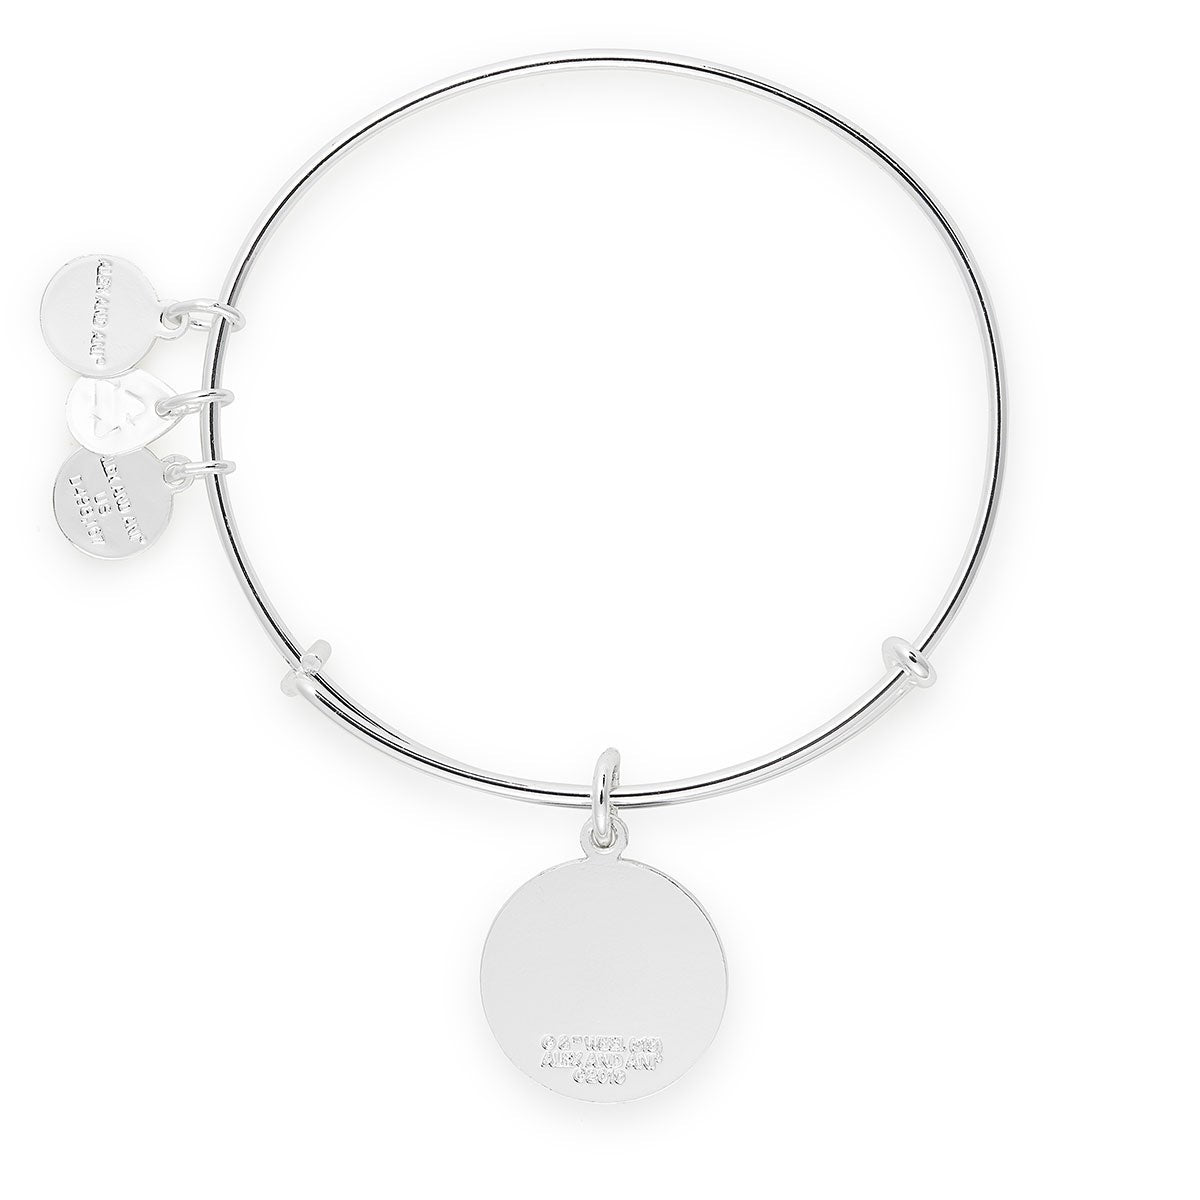 Harry Potter™ 'Help Will Always Be Given' Charm Bangle